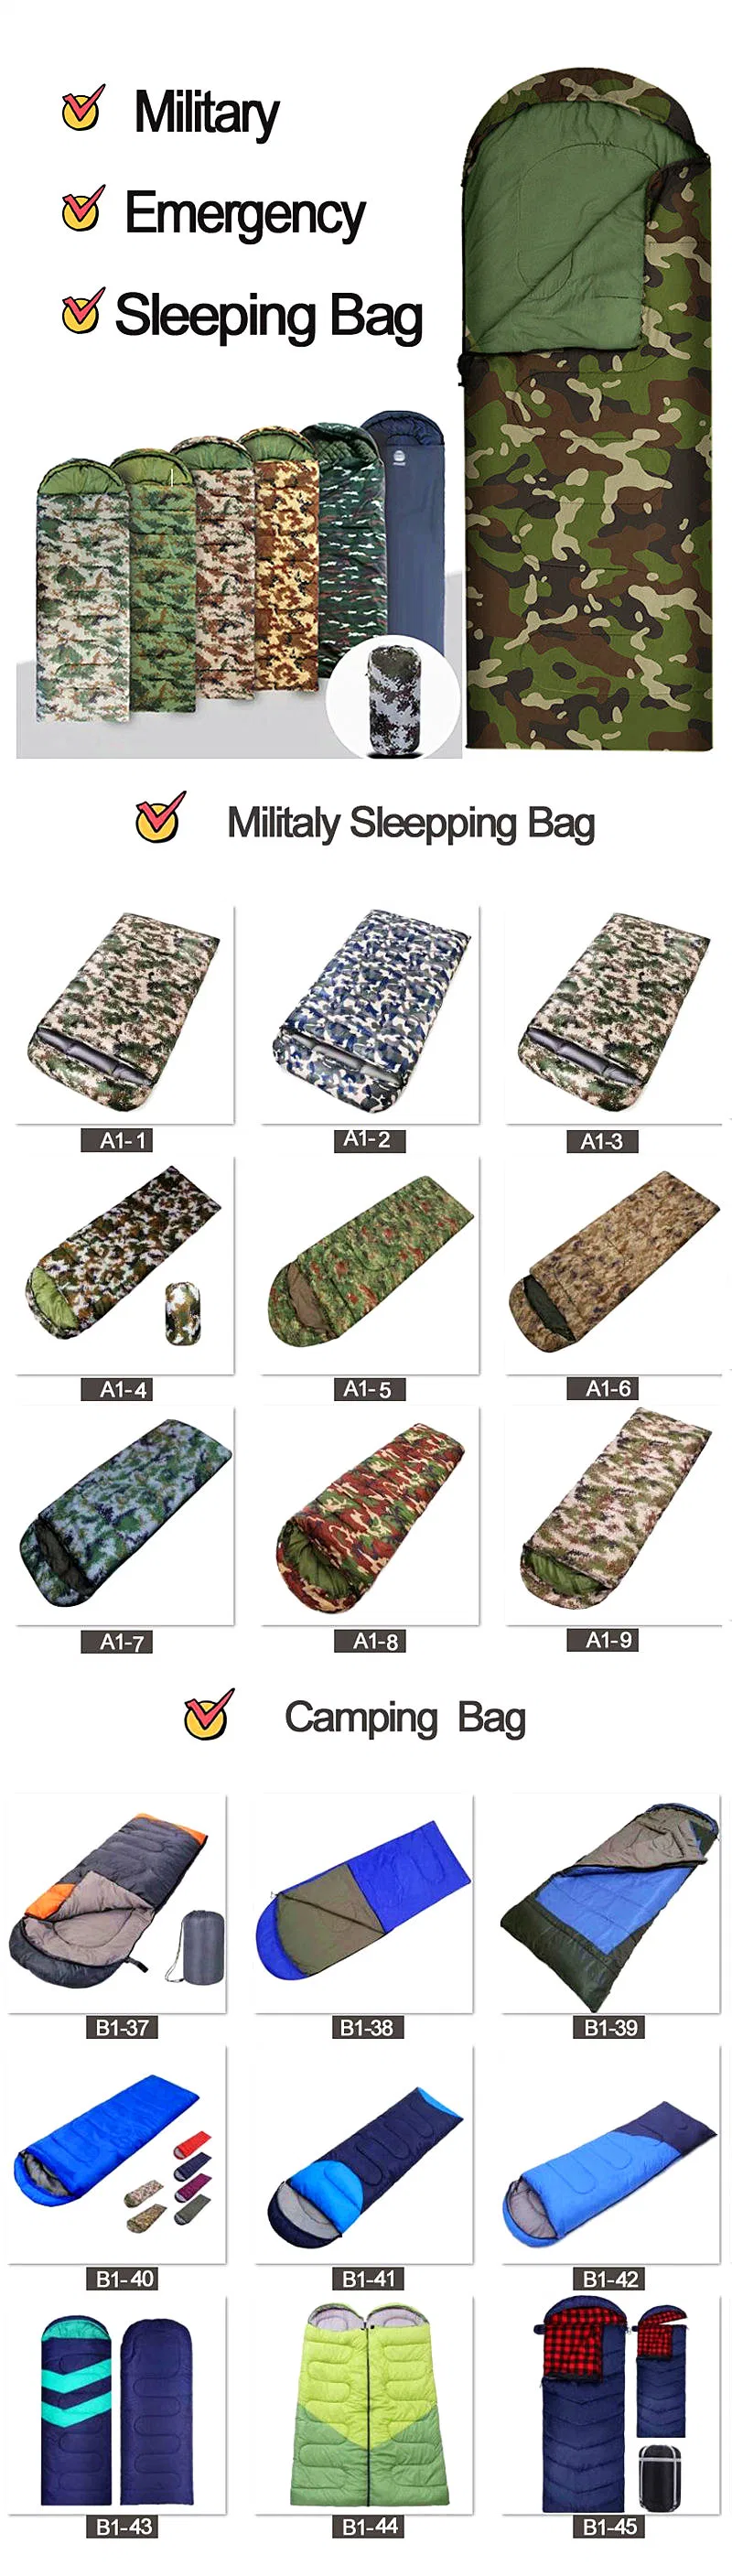 Waterproof Army Style Camp Camouflage 3.5kg Below Zero 20 State Reserve Emergency Green Military Style Sleeping Bags Winter Troops Style Relief Camping Bag